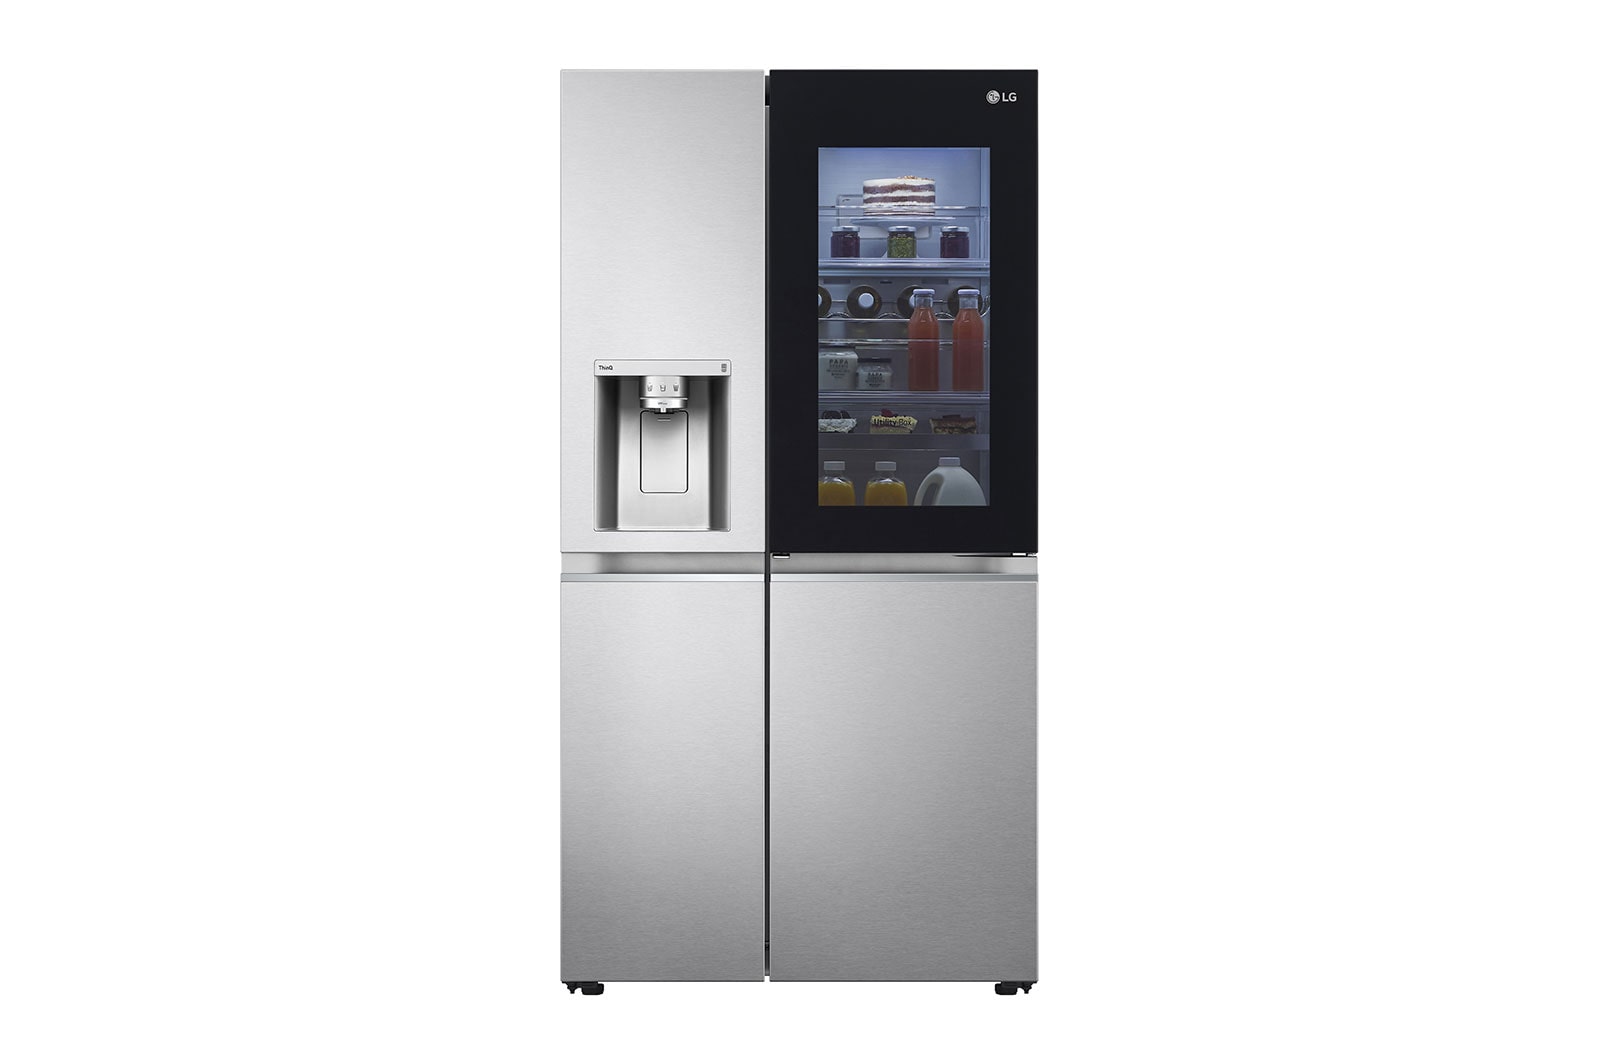 LG GC-X257CSES side by side refrigerator front view